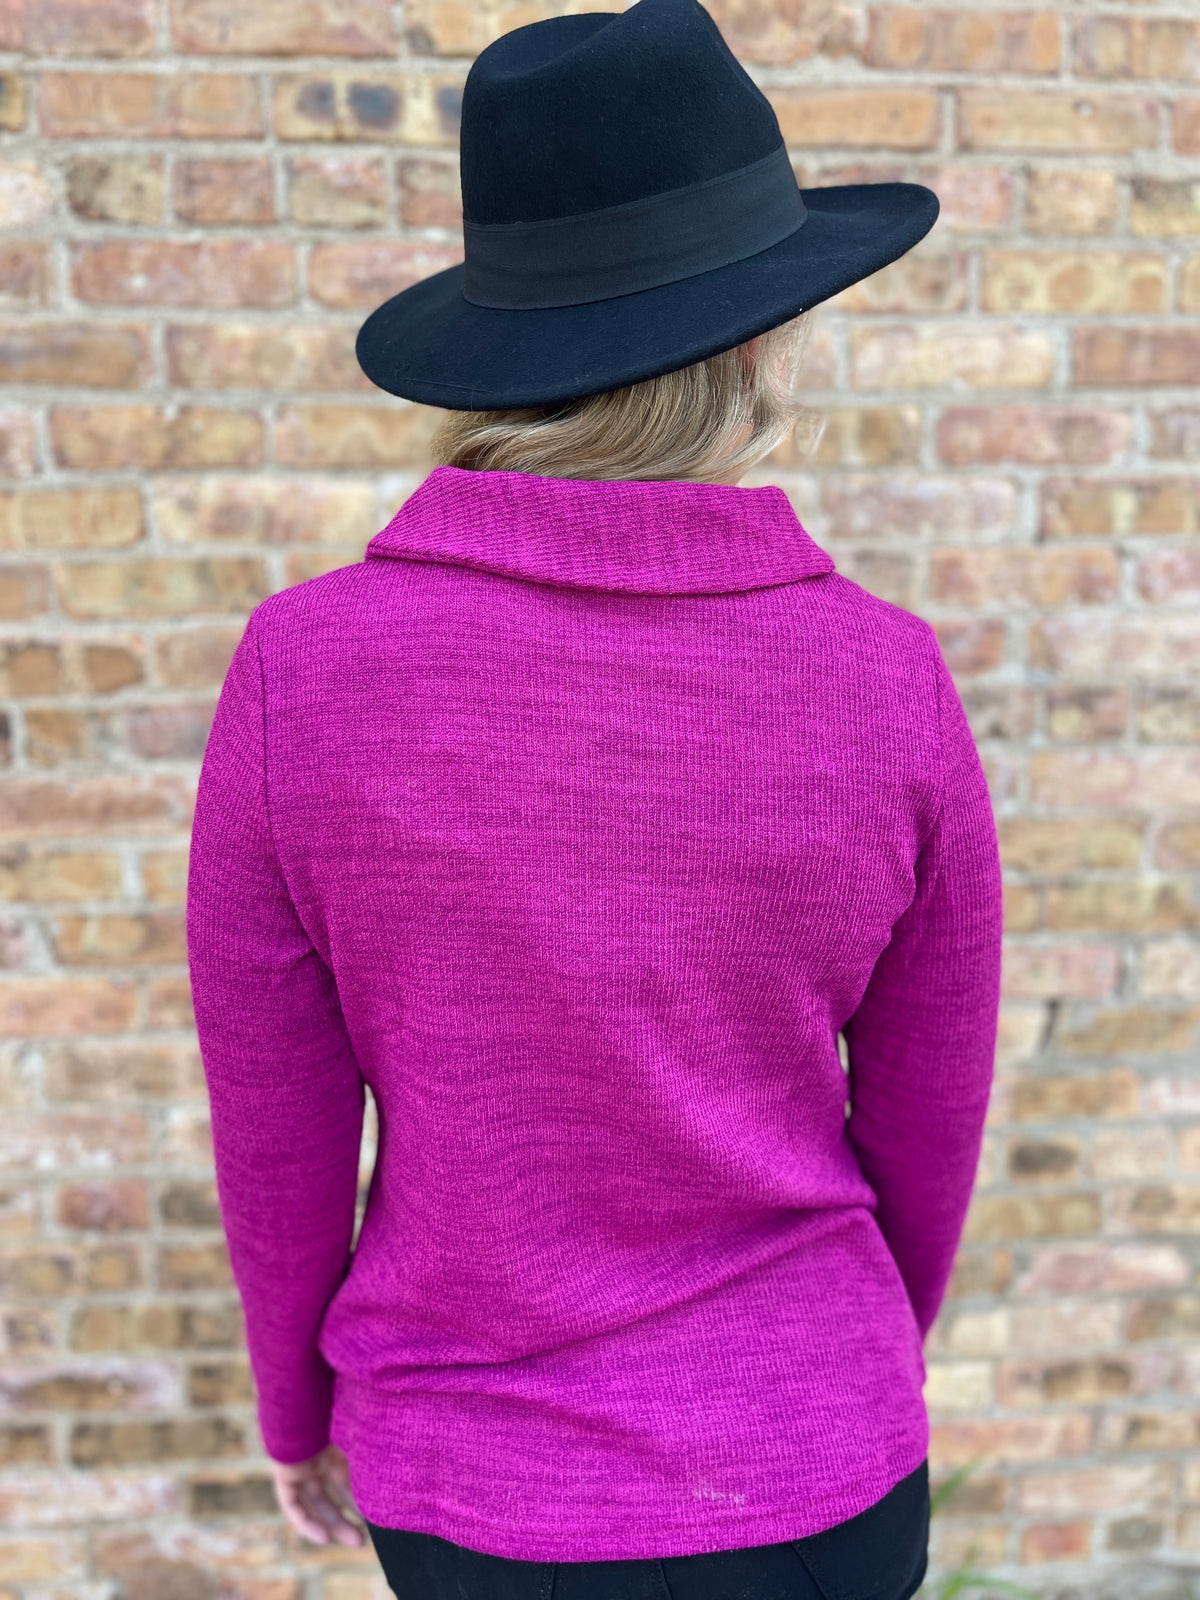 PLUM HEATHERED COWL NECK KNIT TOP